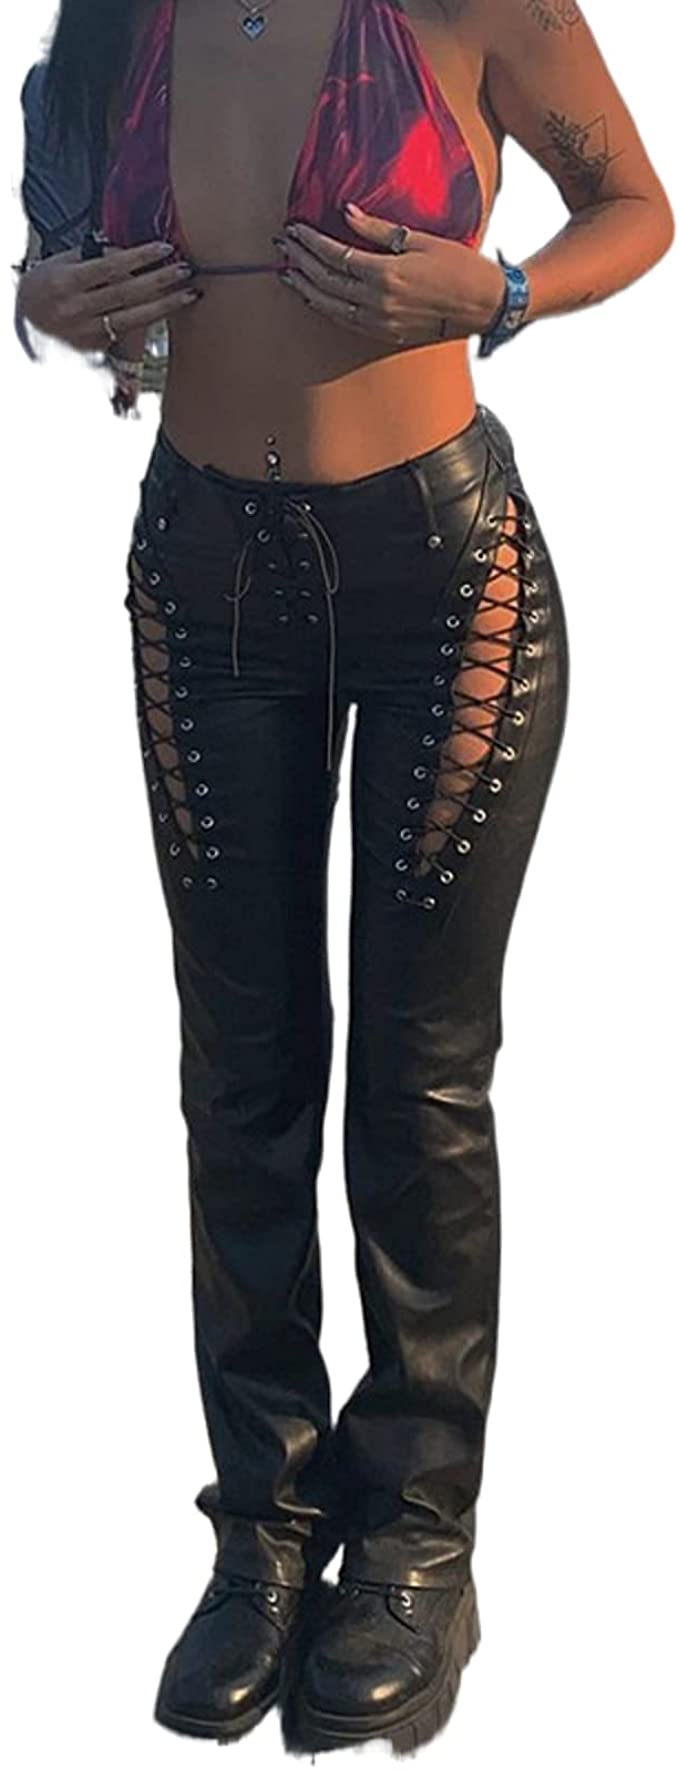 How to Wear Lace Up Leather Pants: Top 13 Outfit Ideas for Ladies